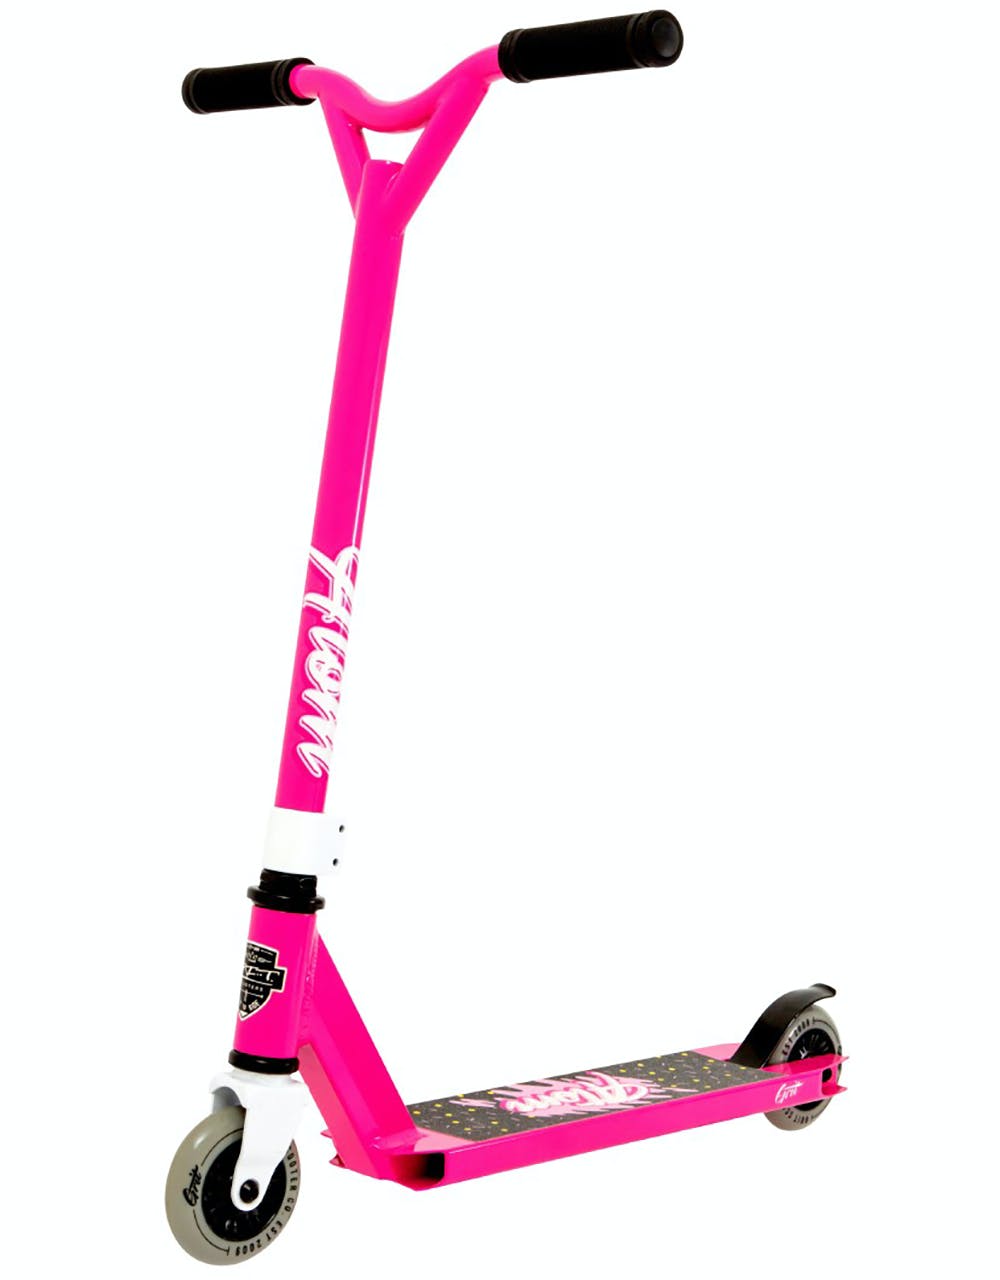 Grit Atom Complete Scooter - Pink